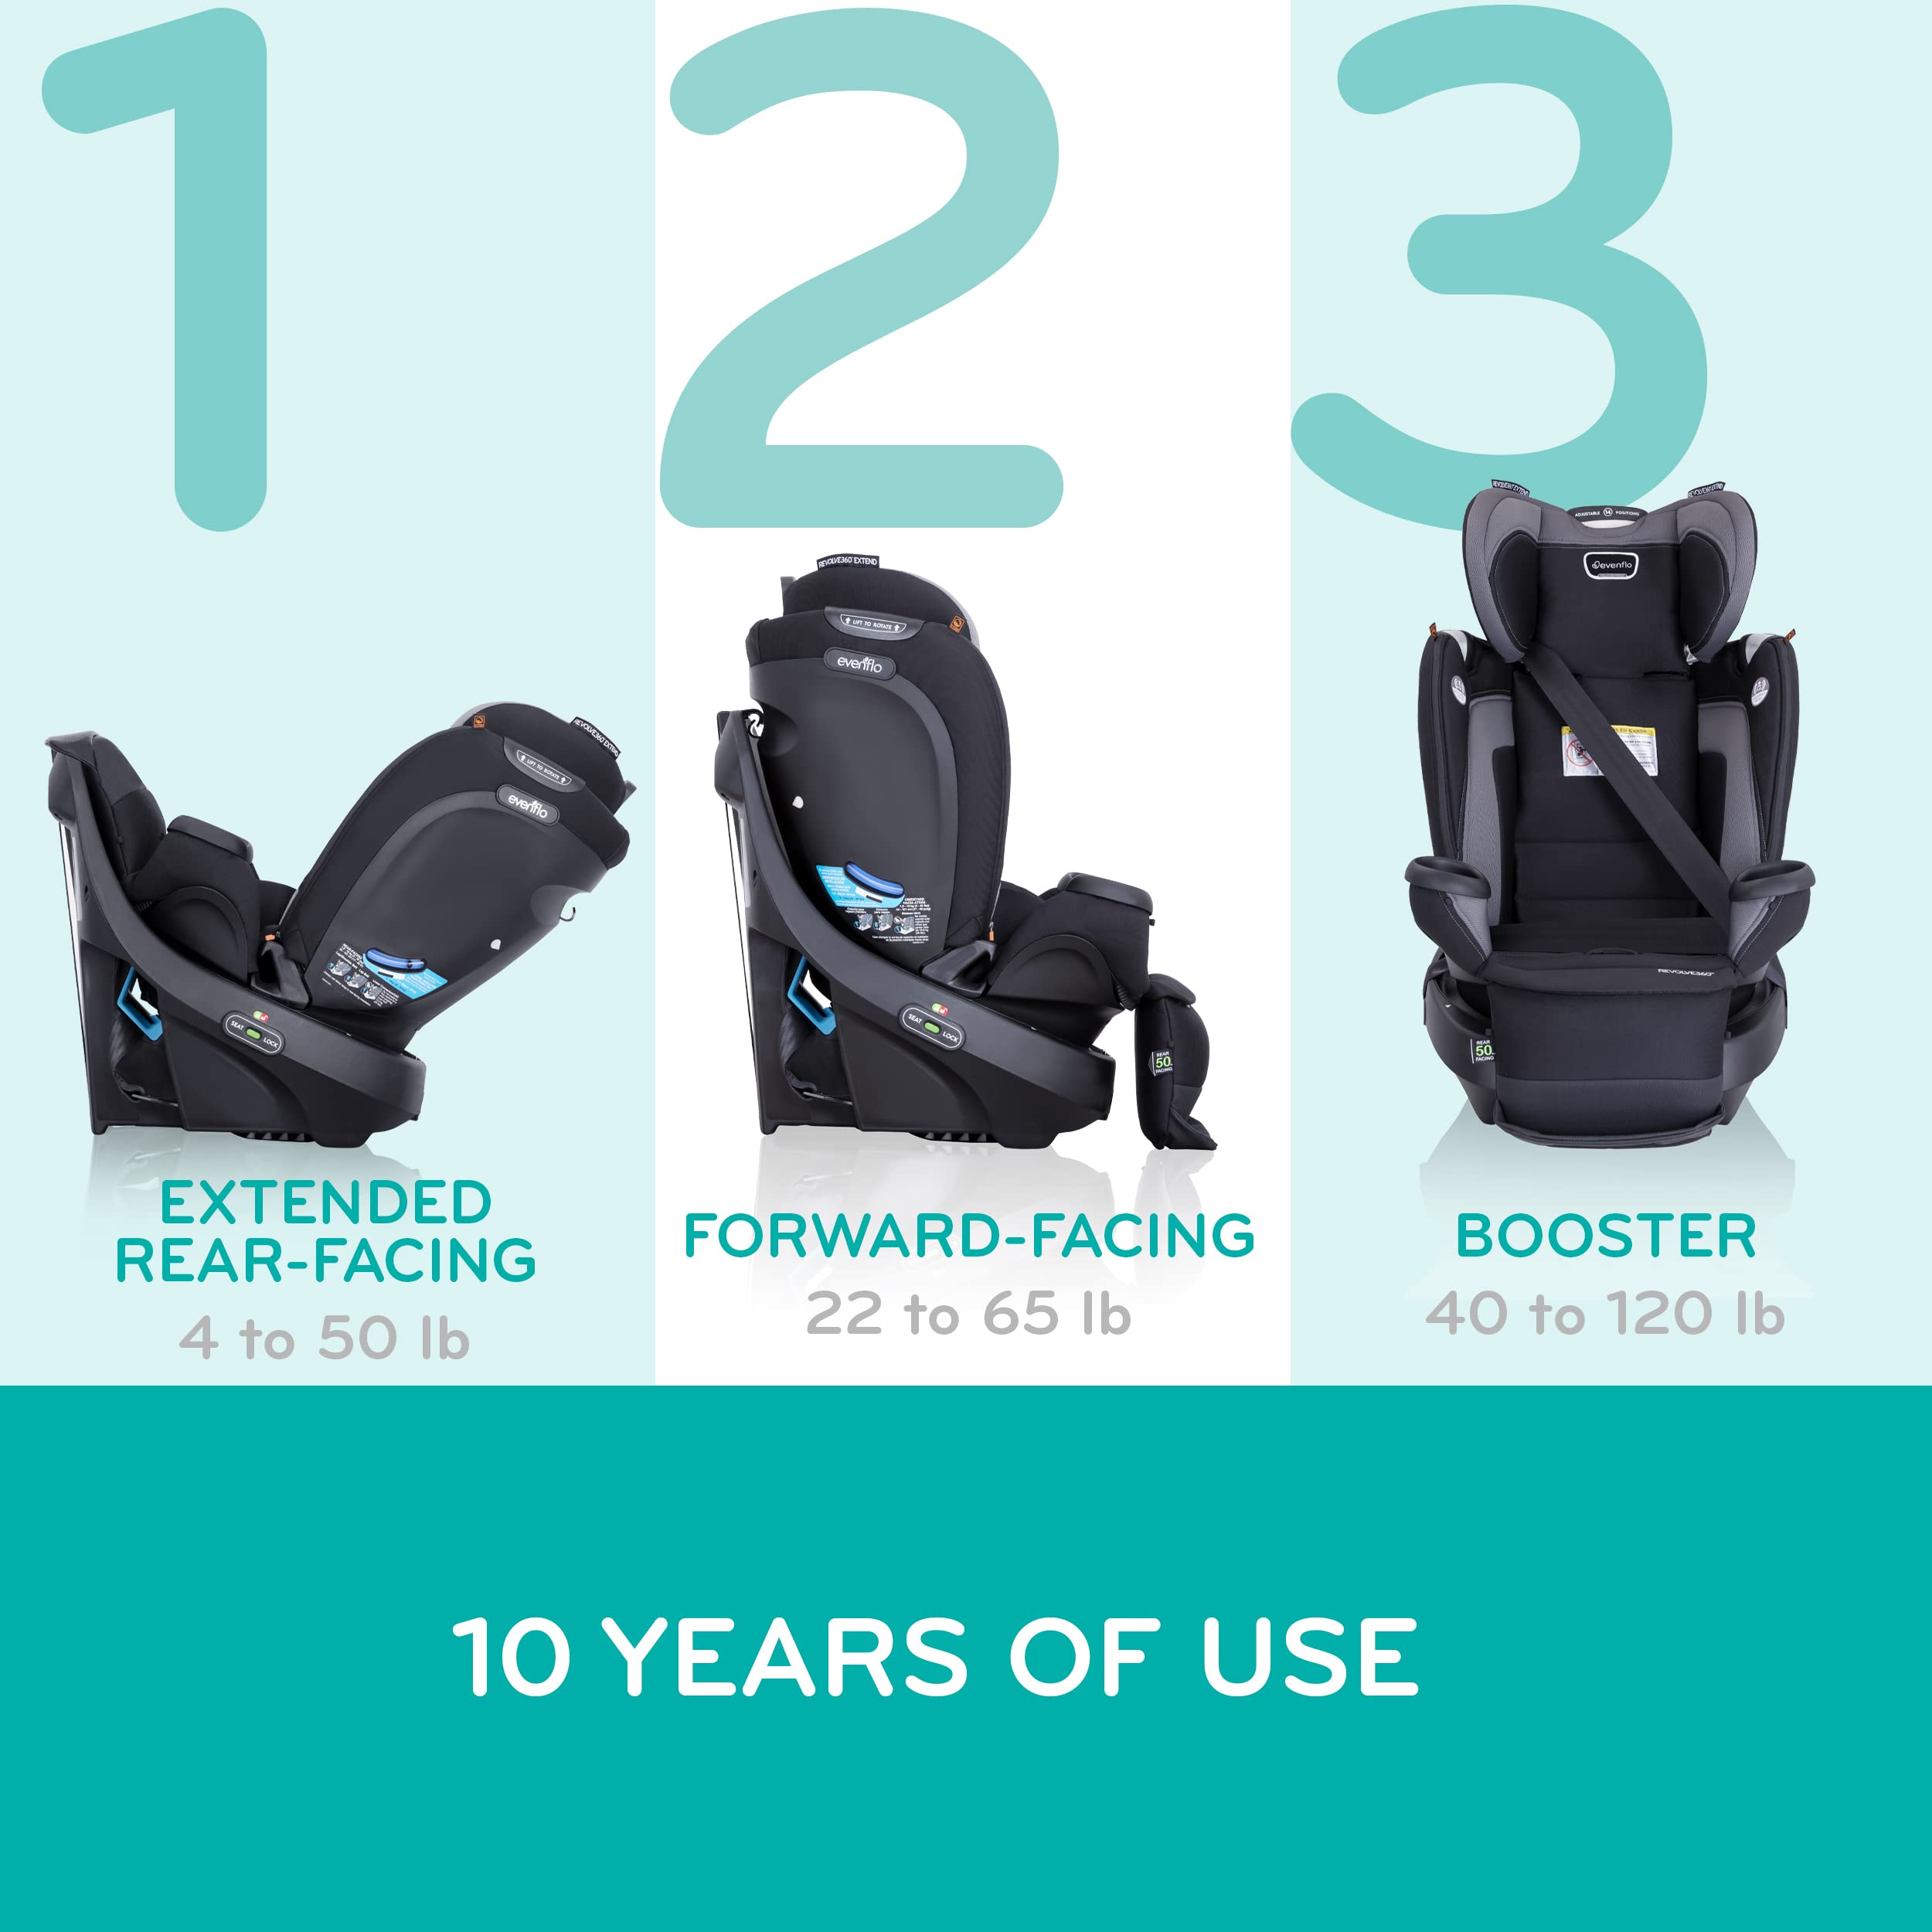 Evenflo Gold Revolve360 Extend All-in-One Rotational Car Seat with Green & Gentle Fabric (Emerald Green) & Revolve360 Extend All-in-One Rotational Car Seat with Quick Clean Cover (Revere Gray)